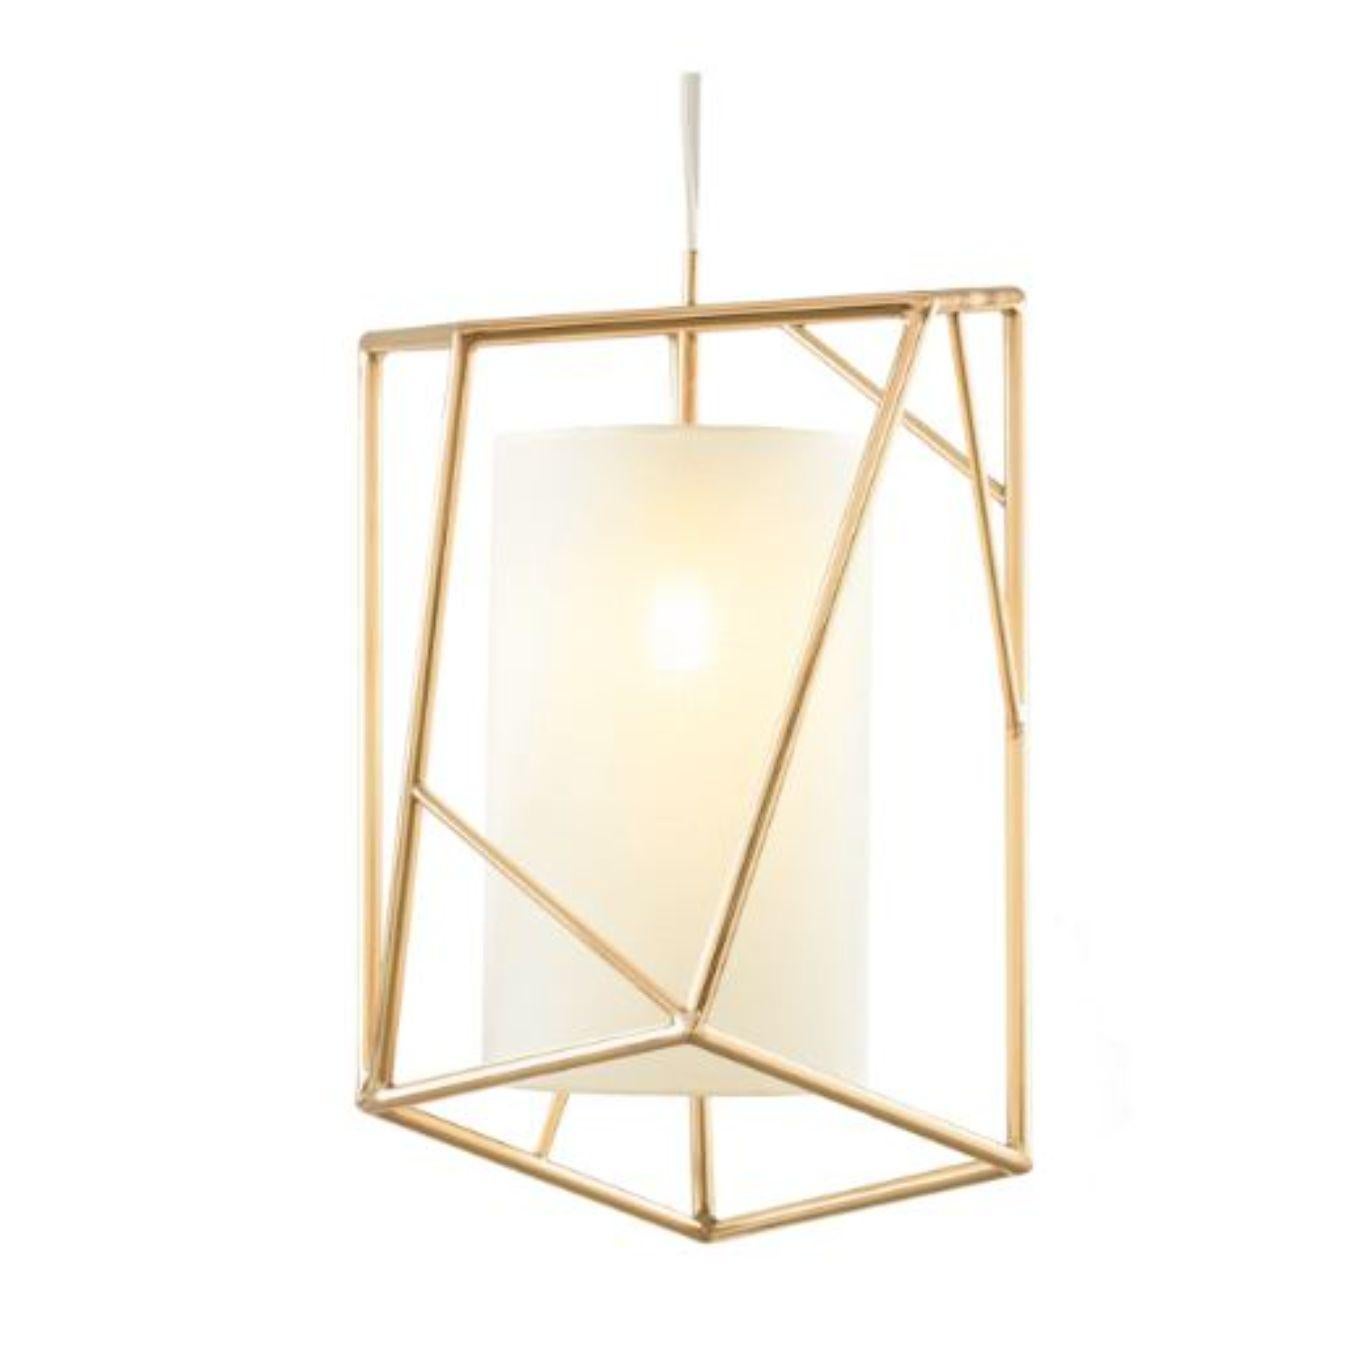 Brass Star II Suspension lamp by Dooq
Dimensions: W 35 x D 35 x H 53 cm
Materials: lacquered metal, polished or satin metal, brass.
Abat-jour: linen
Also available in different colors and materials.

Information:
230V/50Hz
E27/1x15W